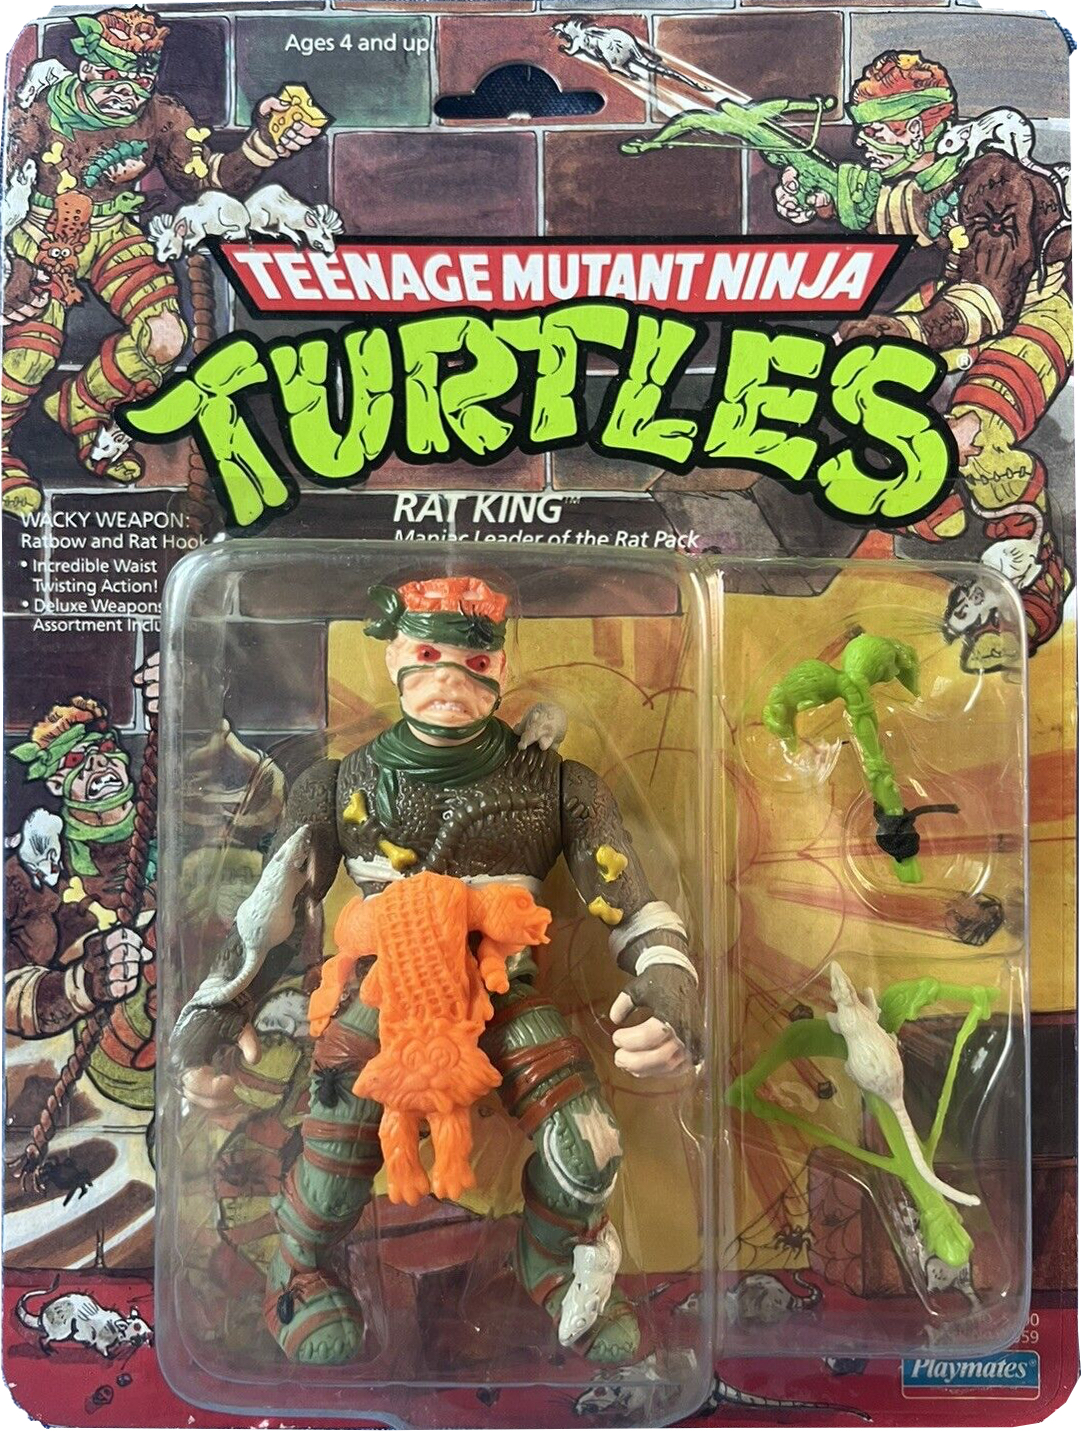 The Rat King, Telepathic Commander of the Rat Army, TMNT, Playmates